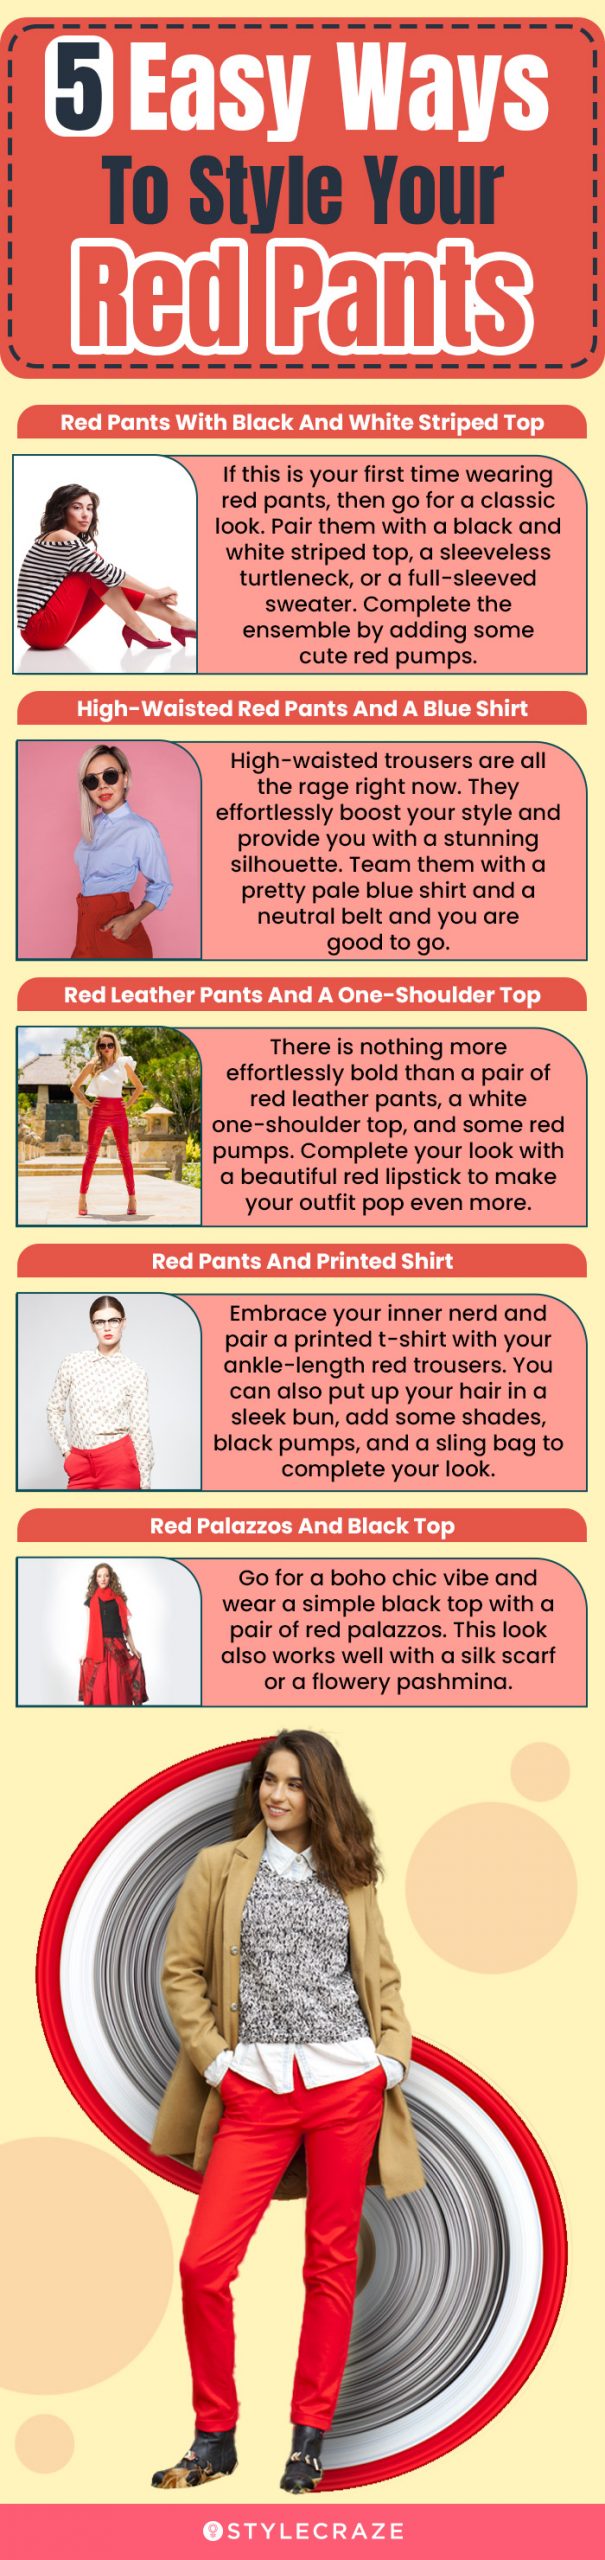 5 easy ways to style your red pants (infographic)